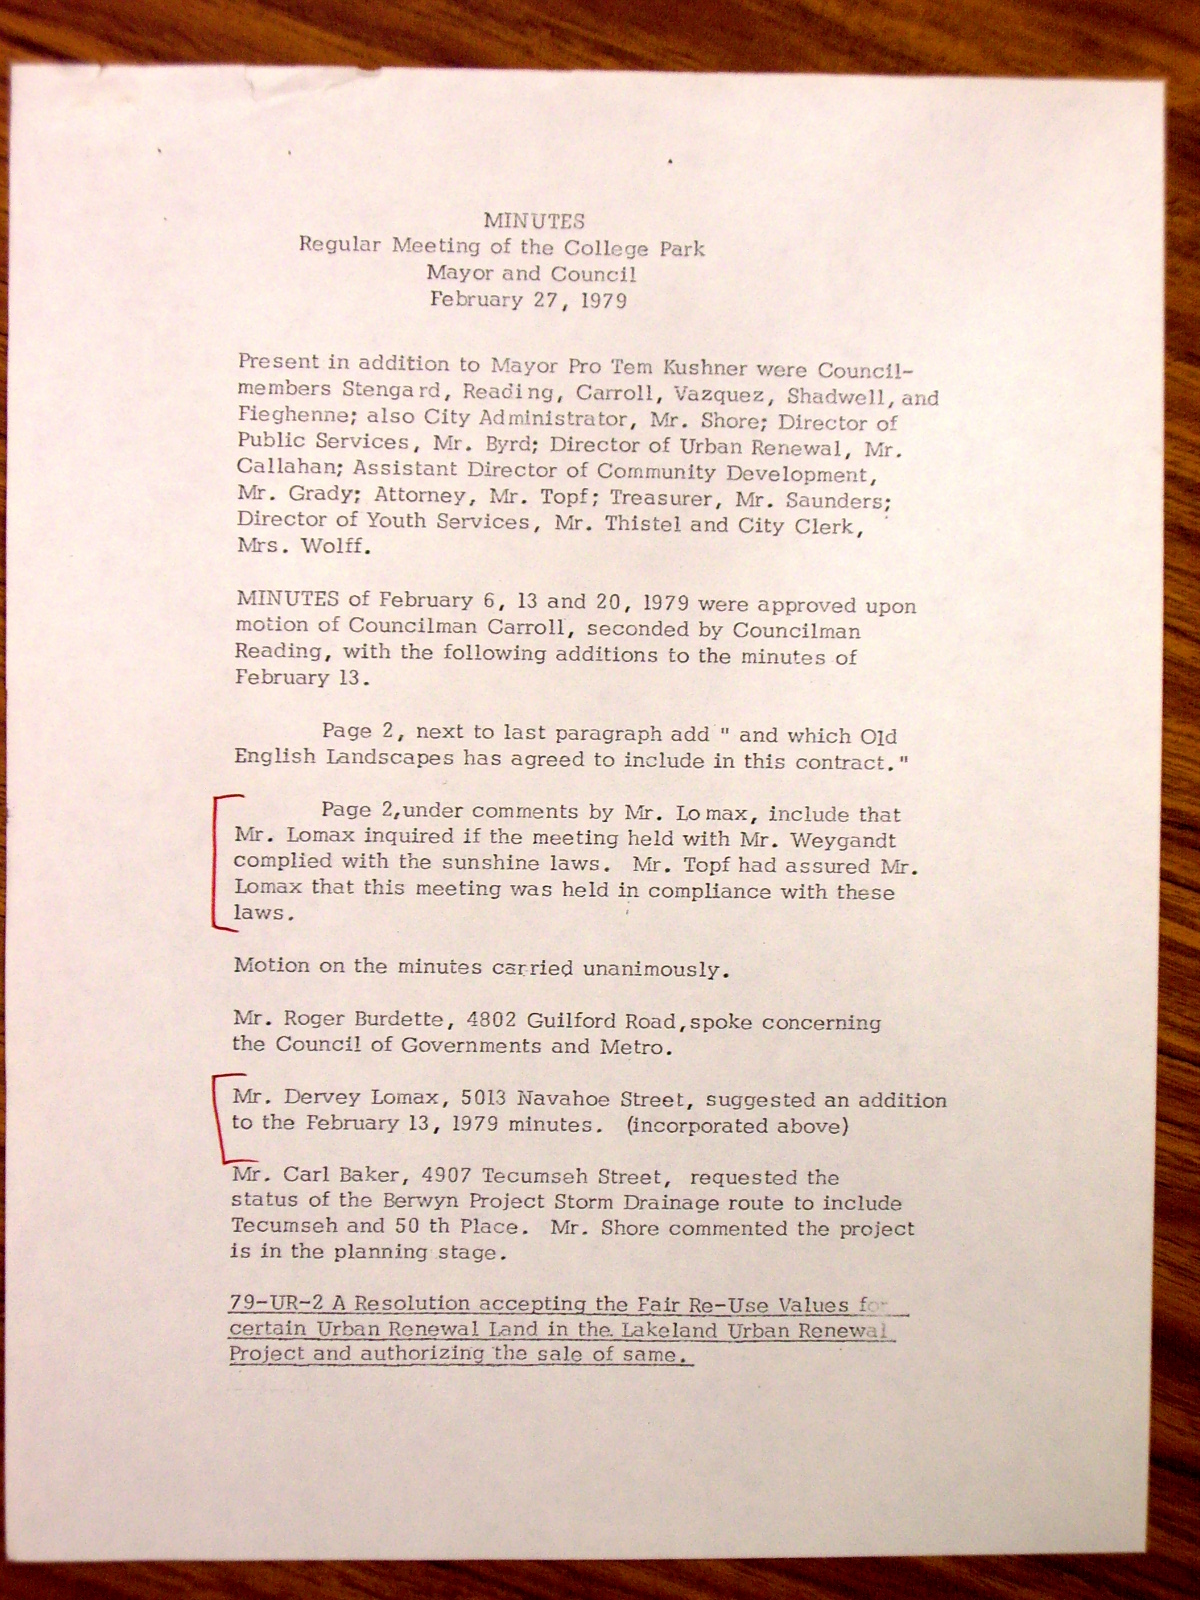 Minutes, Regular Meeting of the College Park Mayor and Council, February 27, 1979